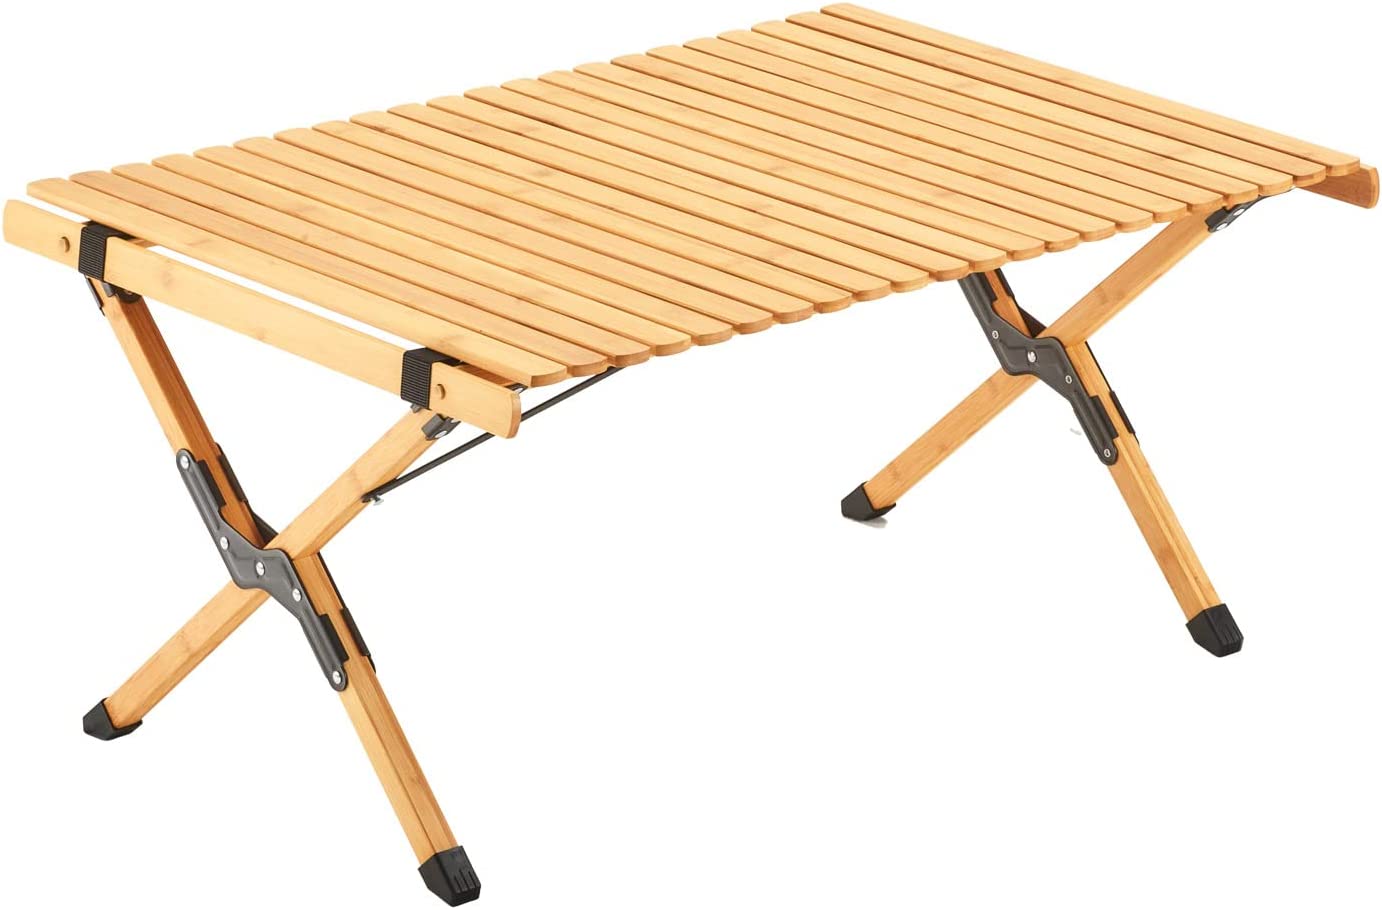 UNICOO –Bamboo Folding Picnic Table, Portable Camping Table W/Carry Bag, Low Height Foldable BBQ Roll Up Table, Beach Table for Indoor & Outdoor Party, BBQ and Hiking